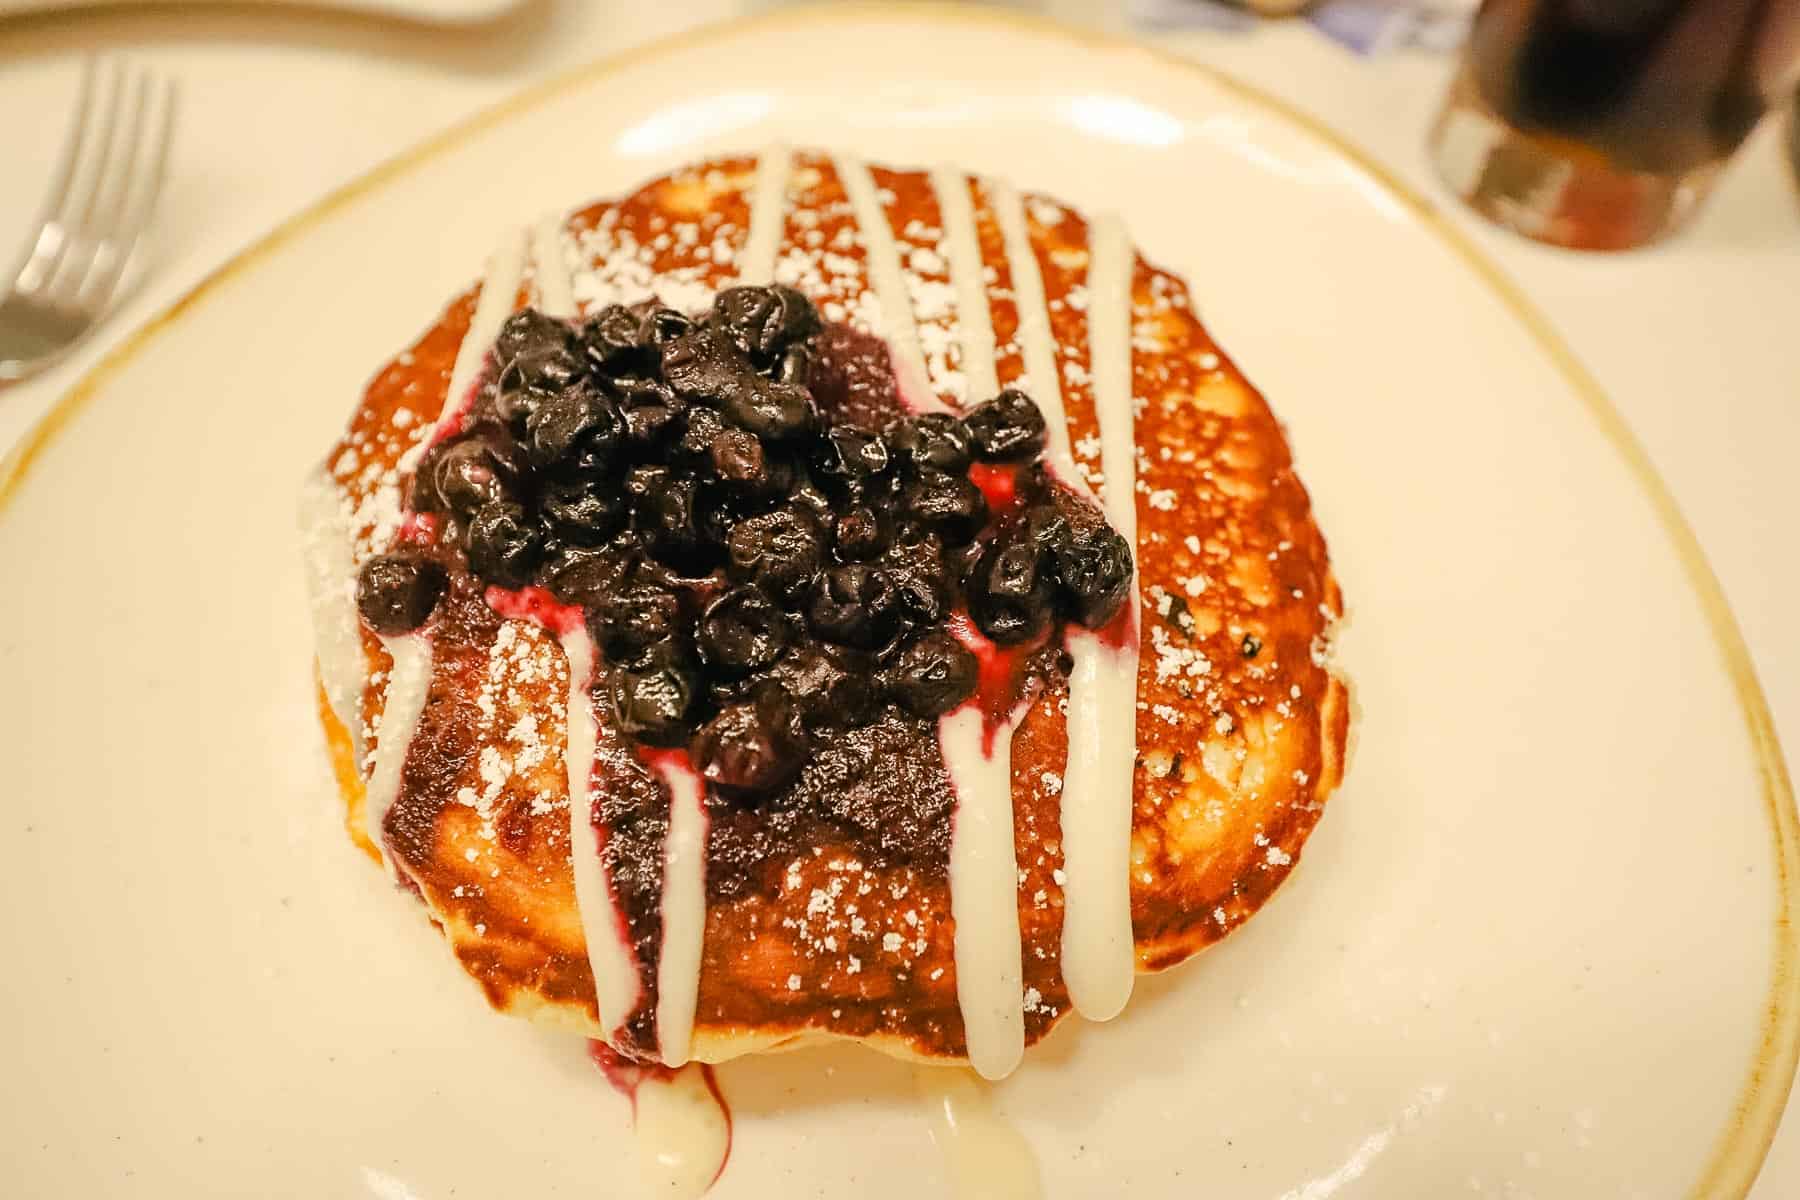 an order of pancakes from Steakhouse 71 at the Contemporary 